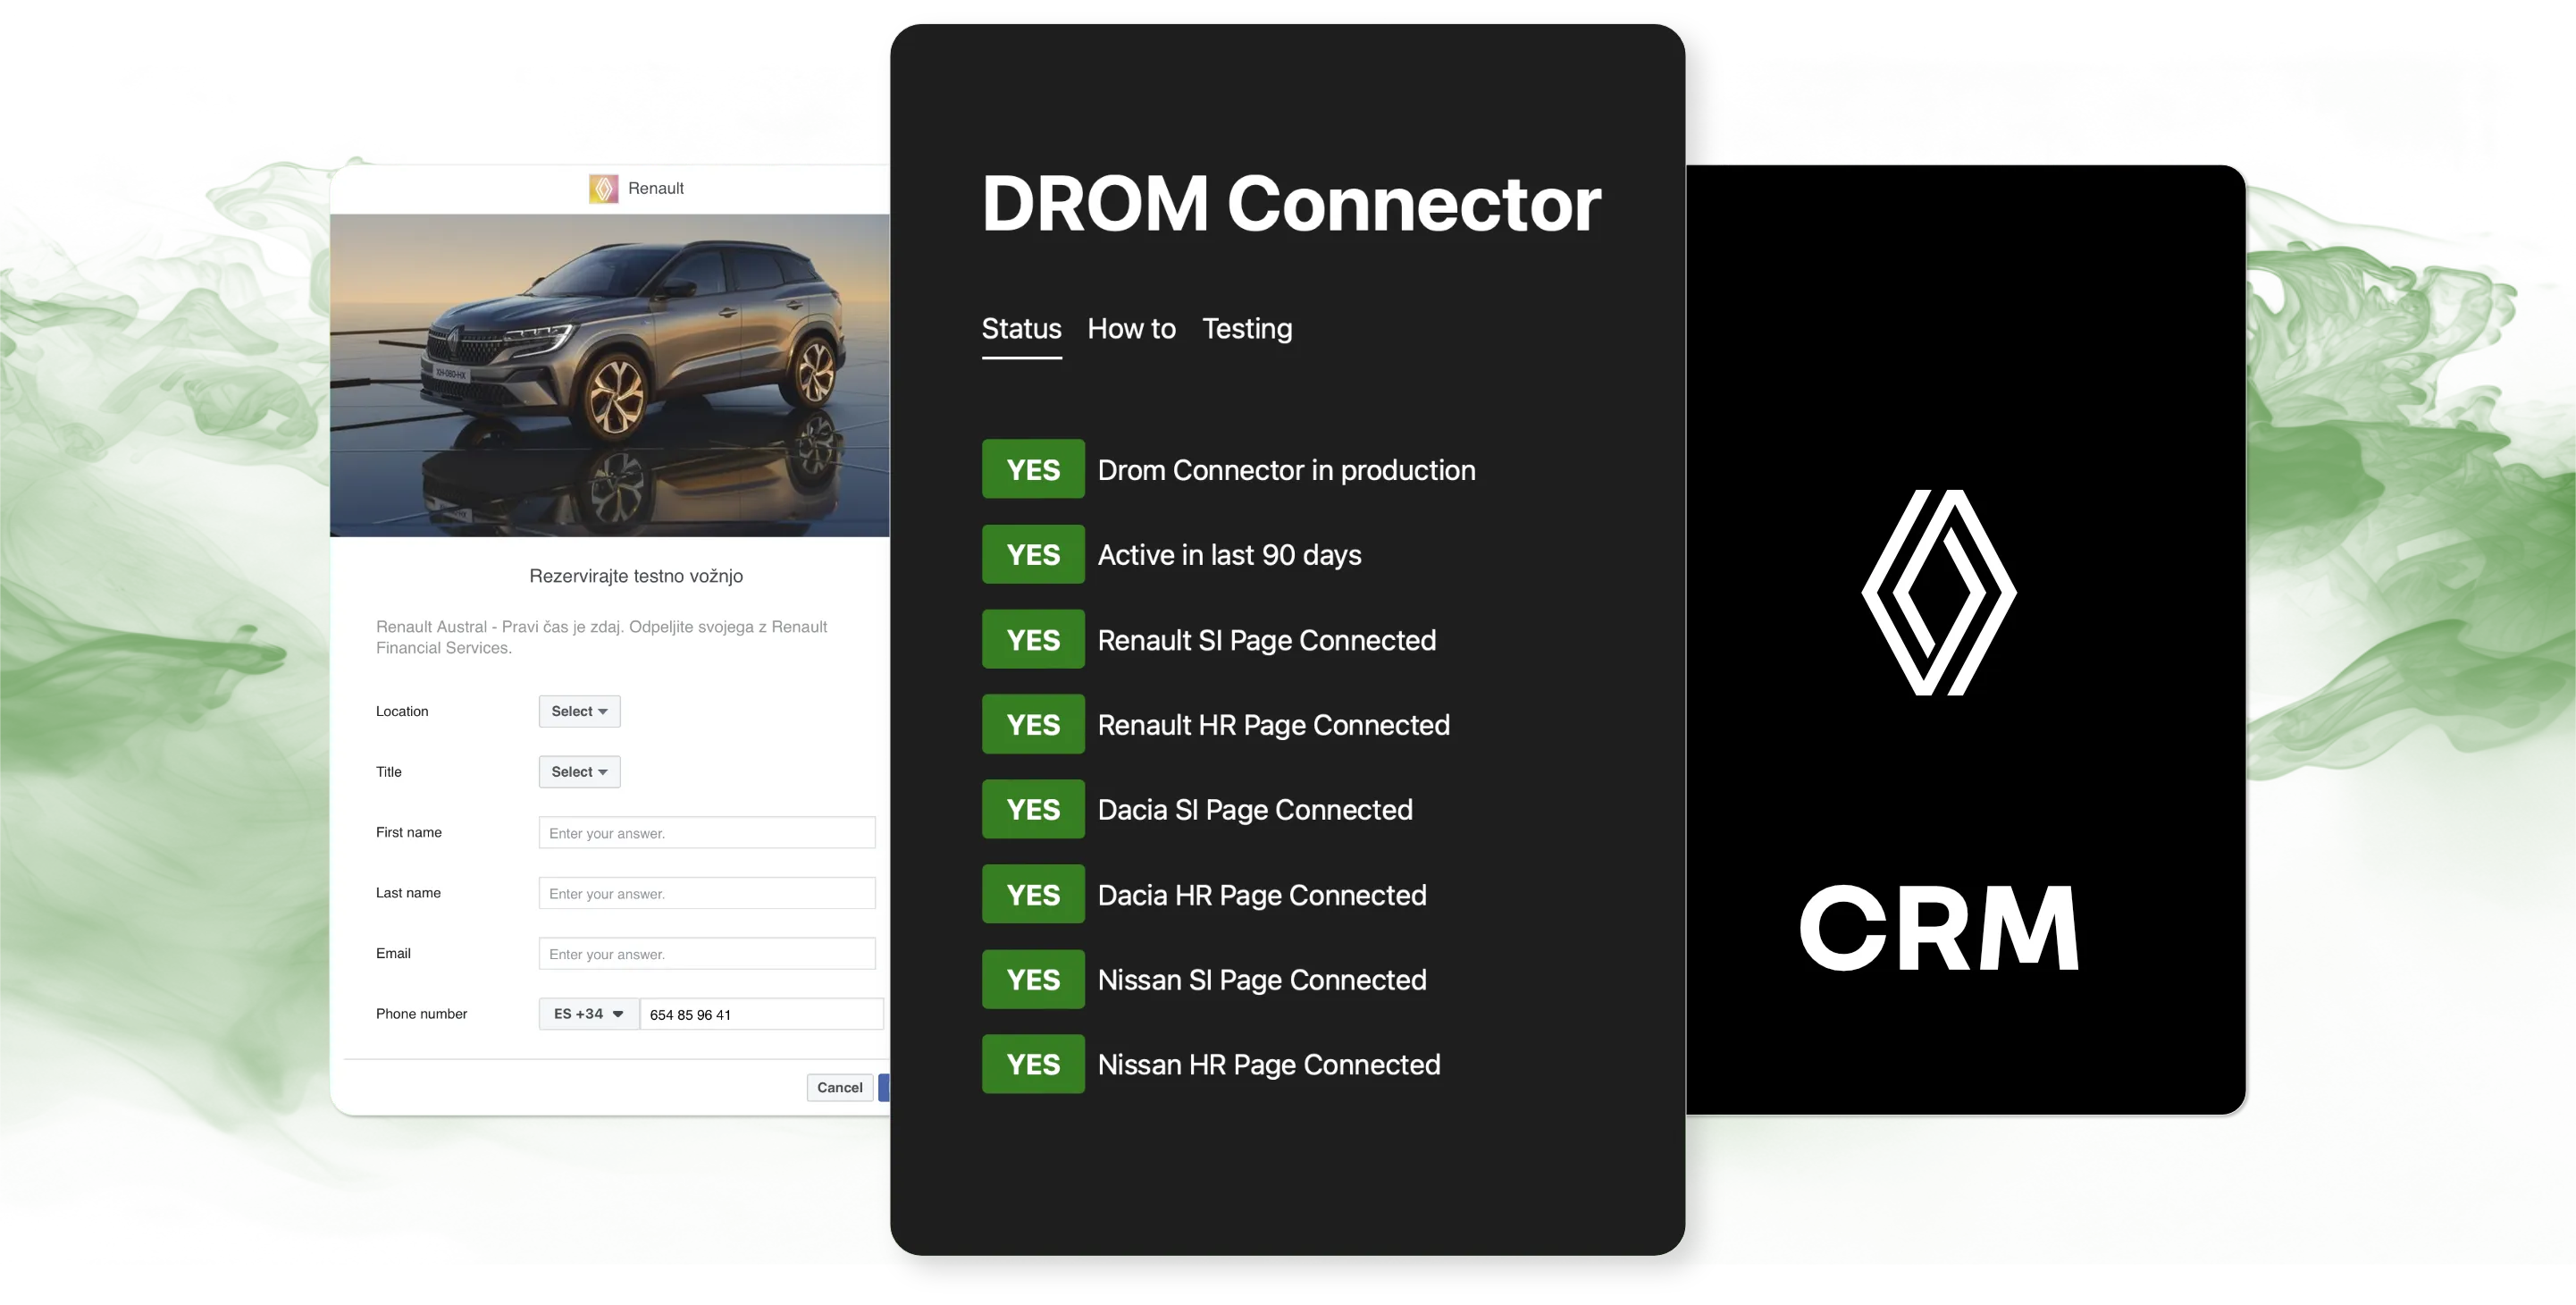 DROM Connector